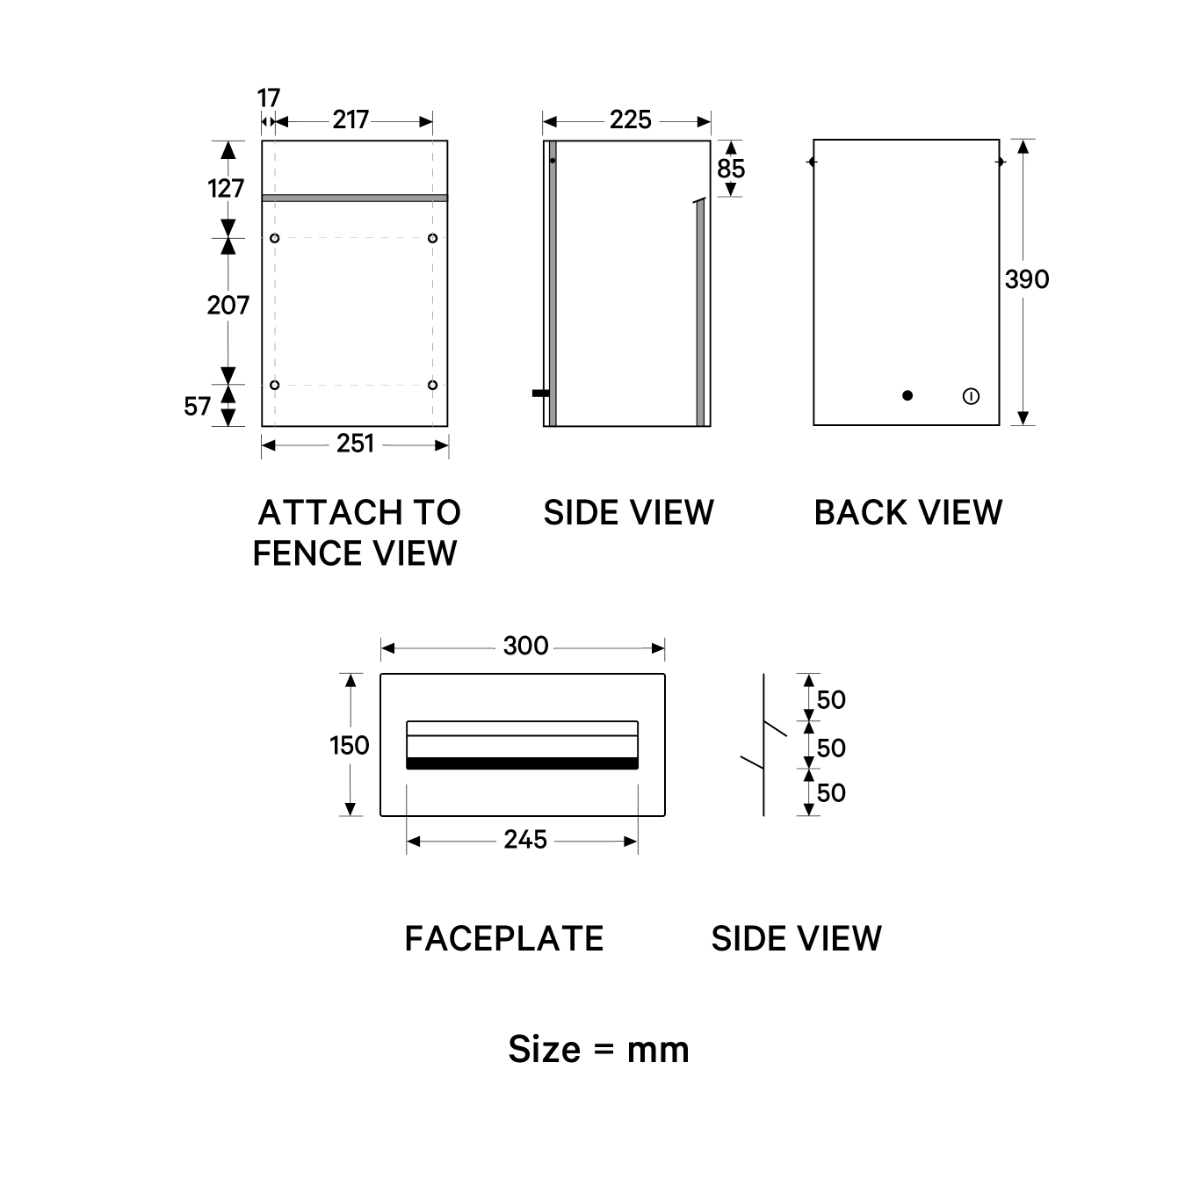 Behind the Fence Catcher - Stainless Steel Faceplate Letterbox - Specs